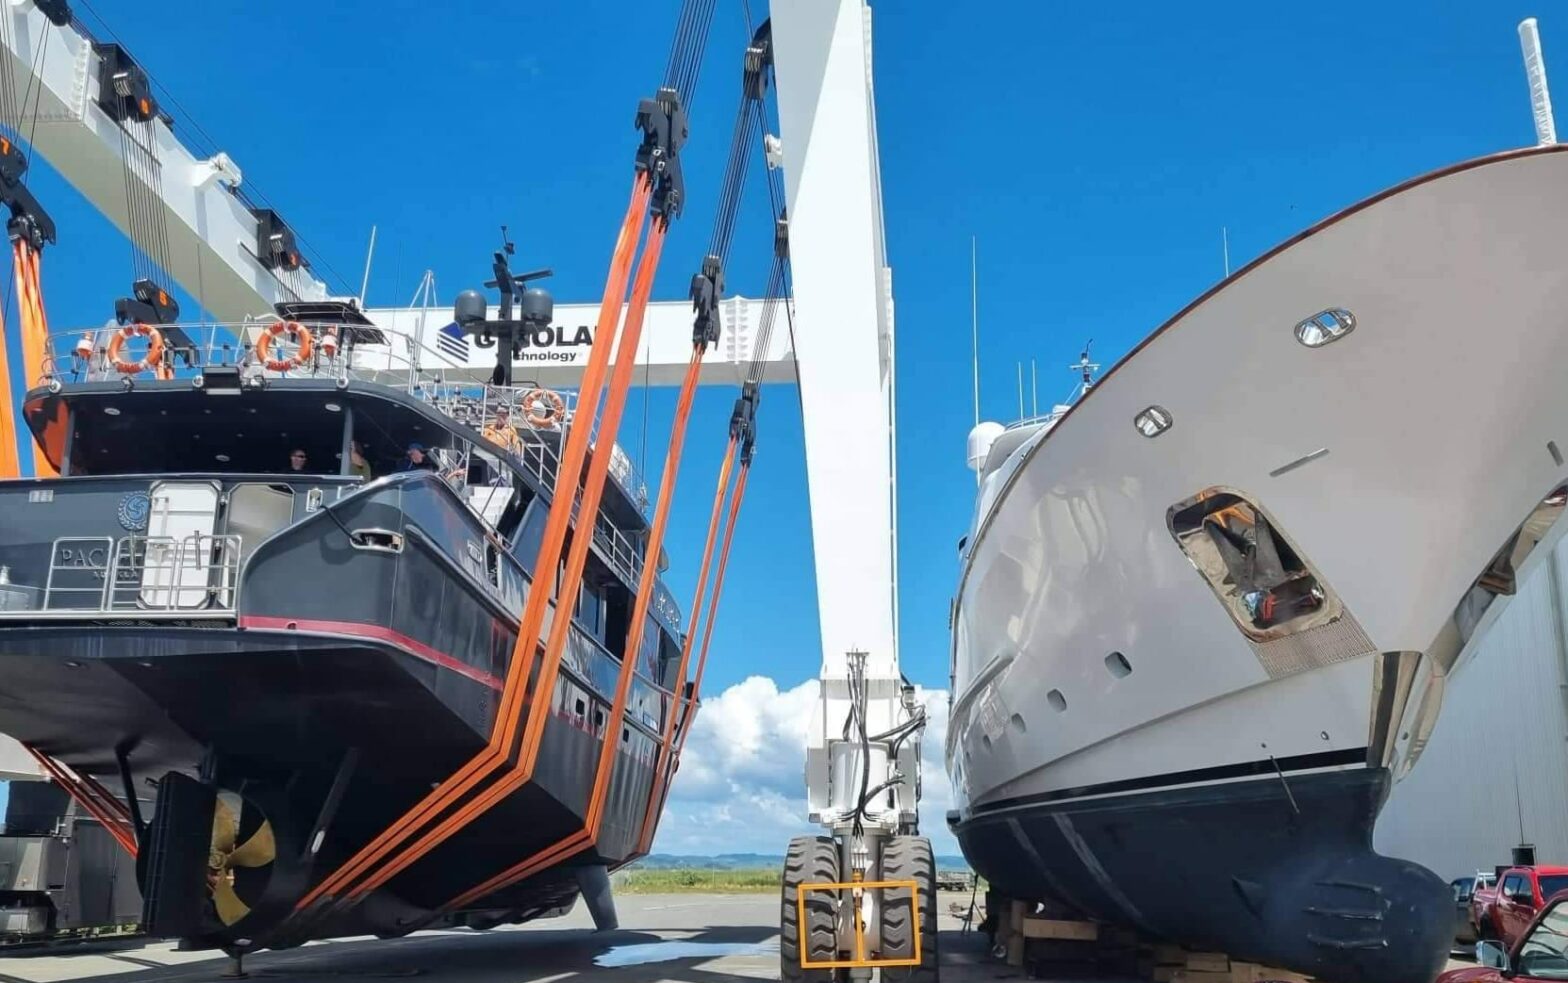 the new 560T travel lift transporting Superyachts on the hardstand at South Shipyard.